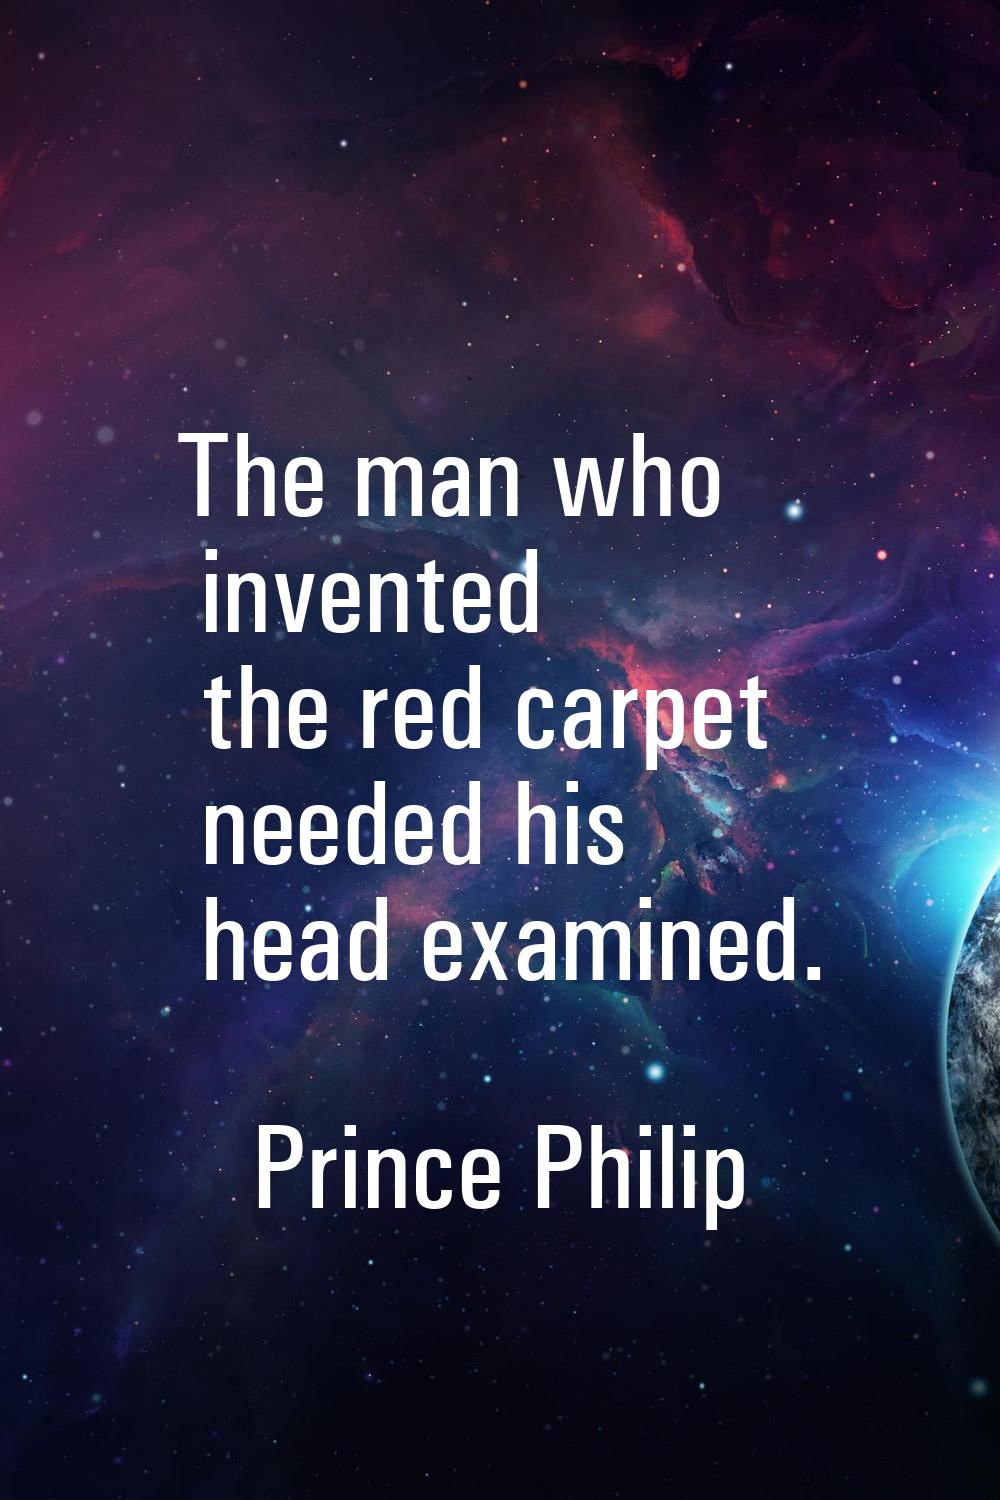 The man who invented the red carpet needed his head examined.